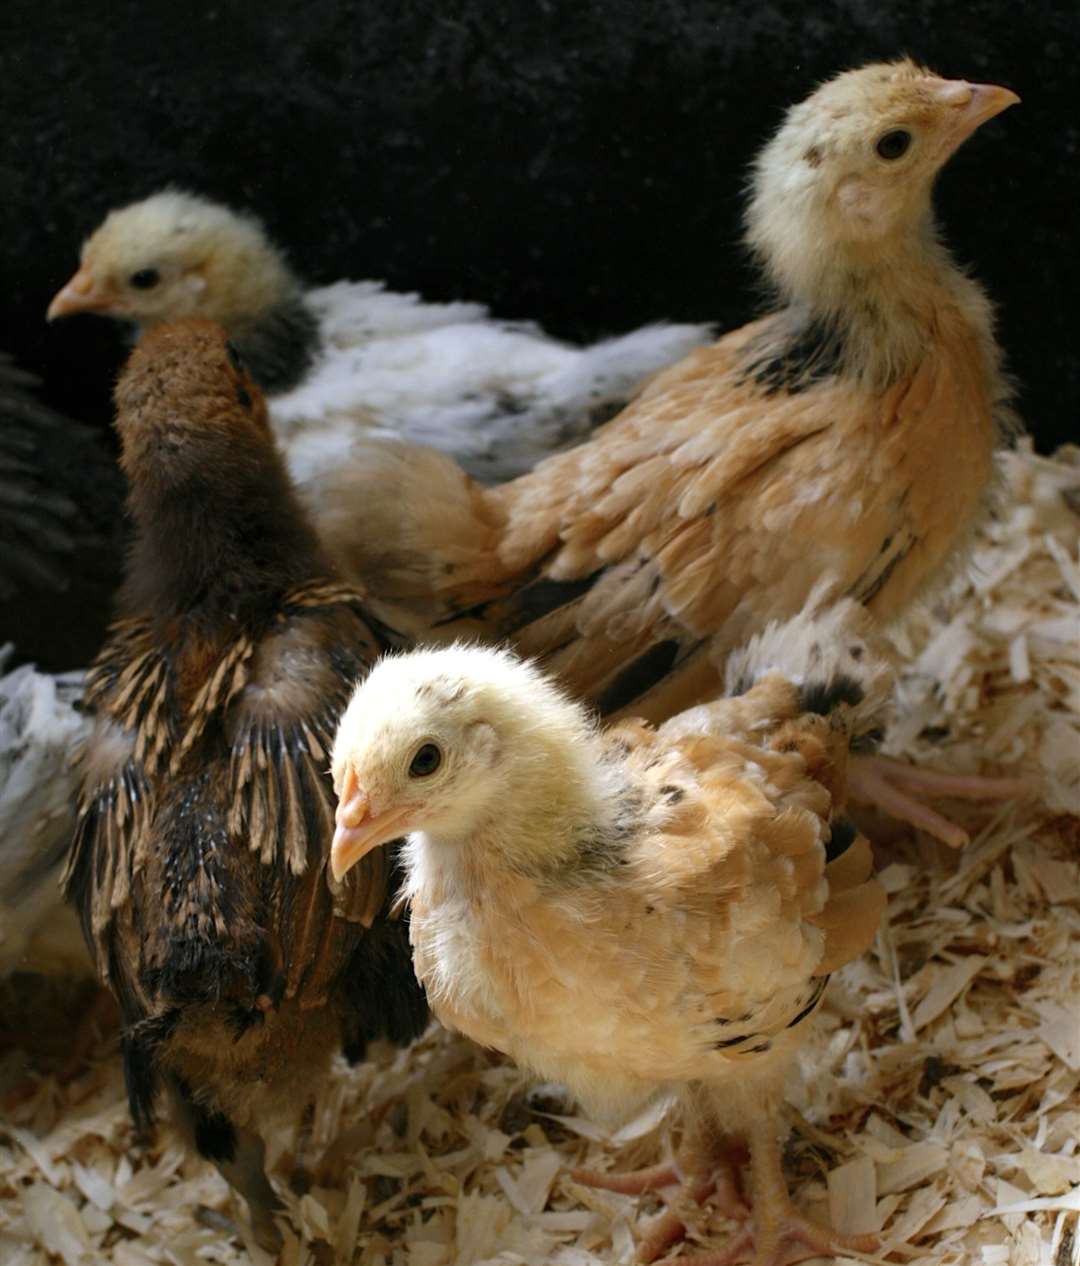 Learn about hens and gardens